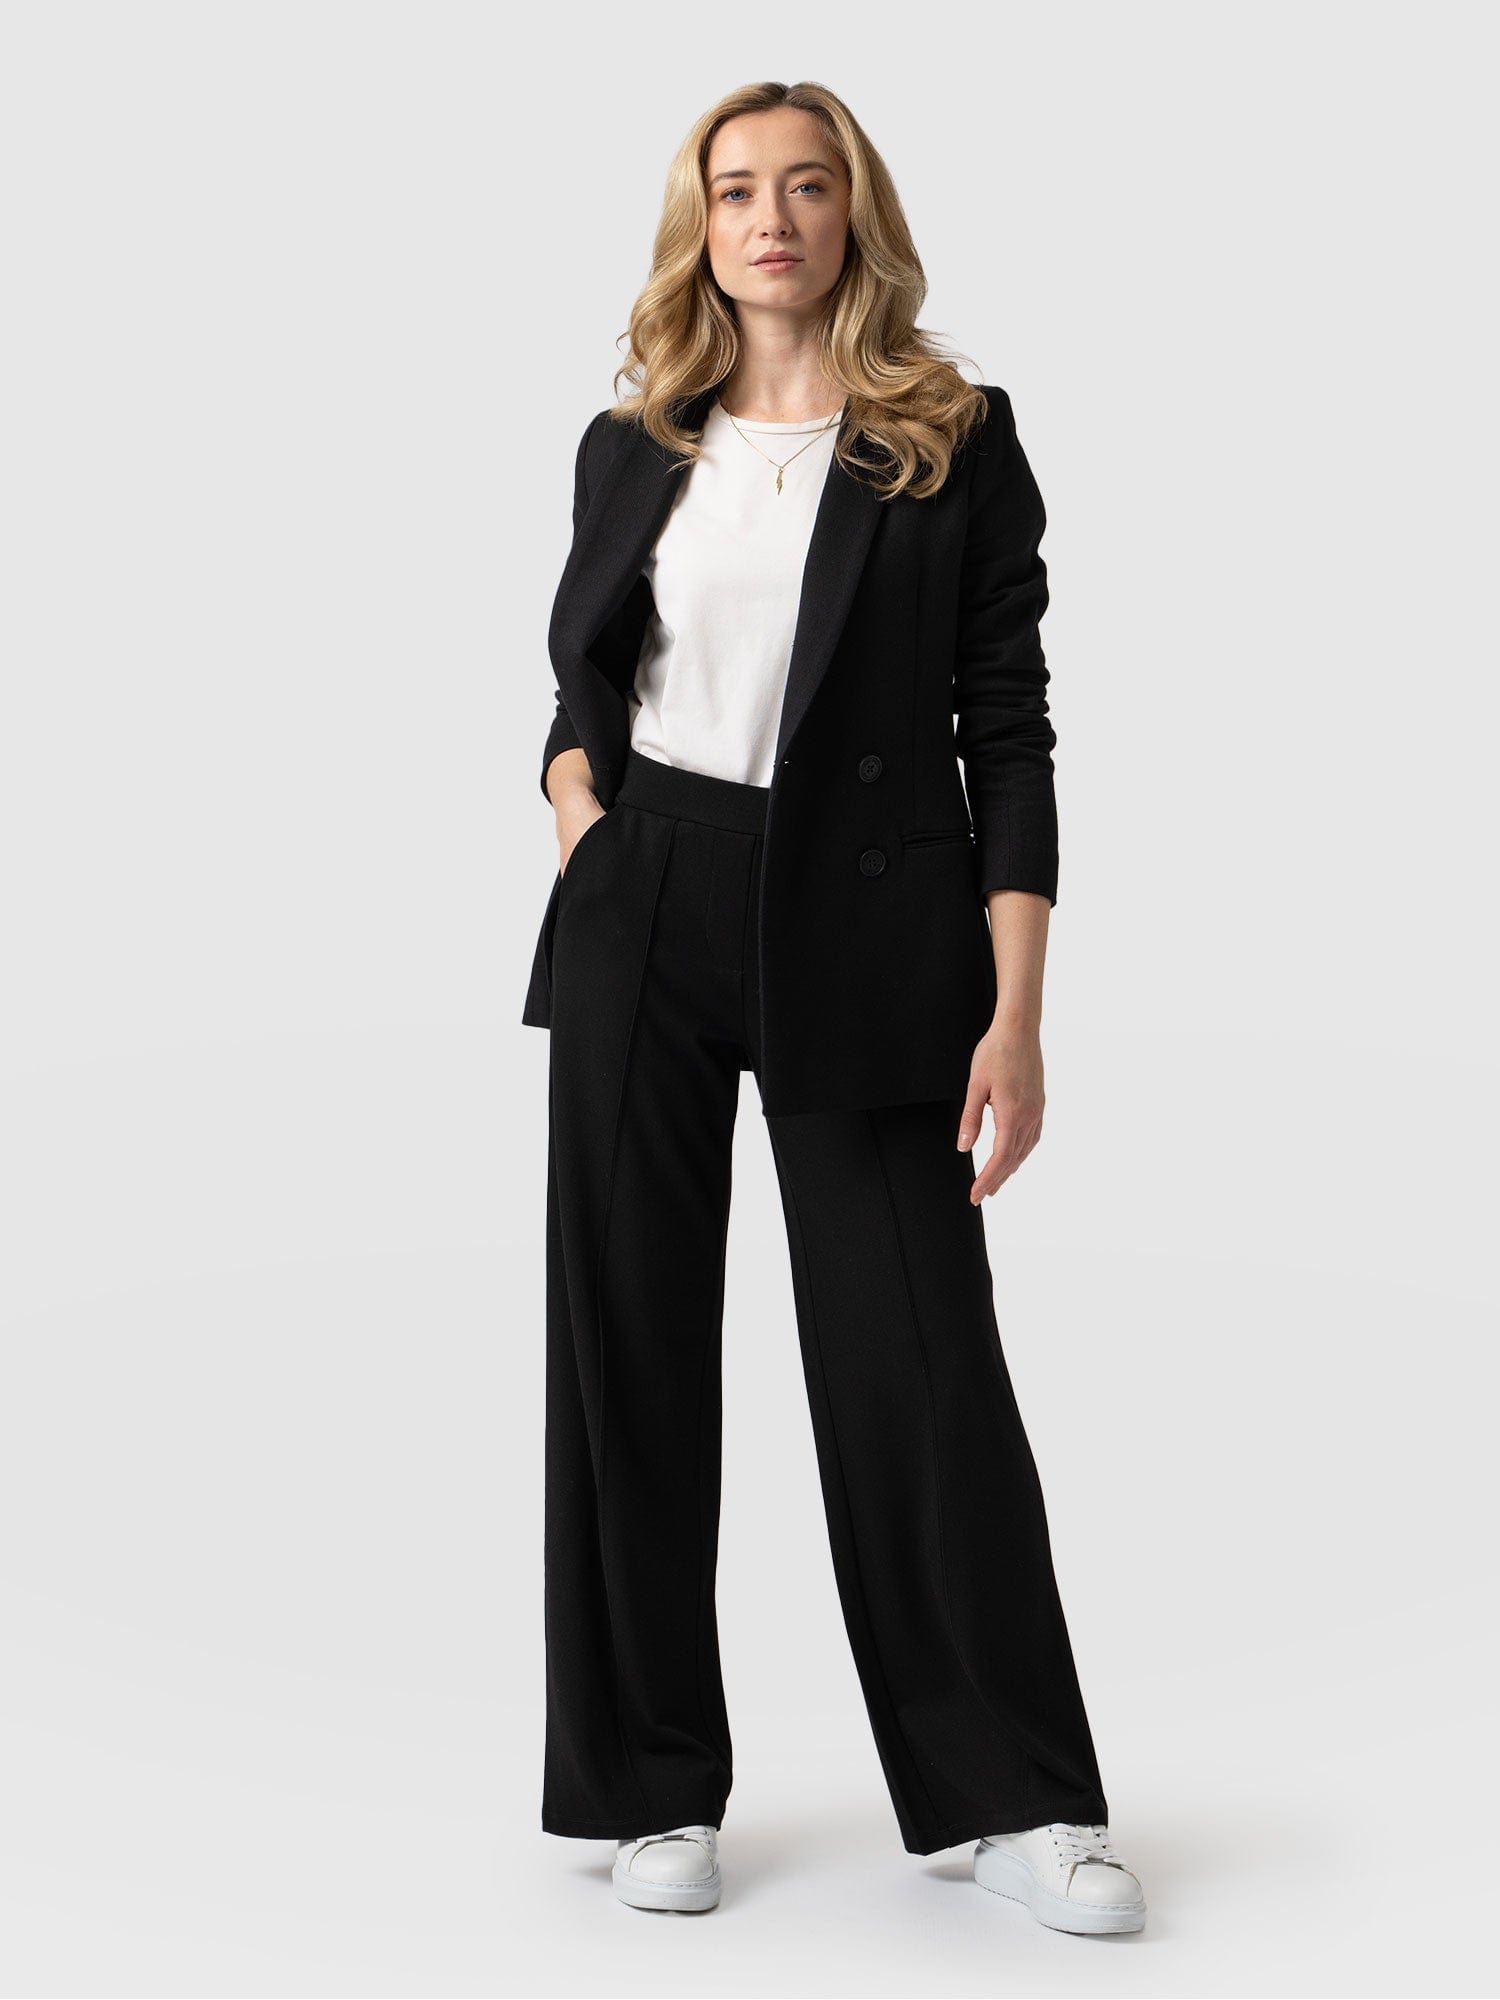 Ladies Womens Work Trousers Business Office Formal Straight Leg Pants Size  6-14 | eBay